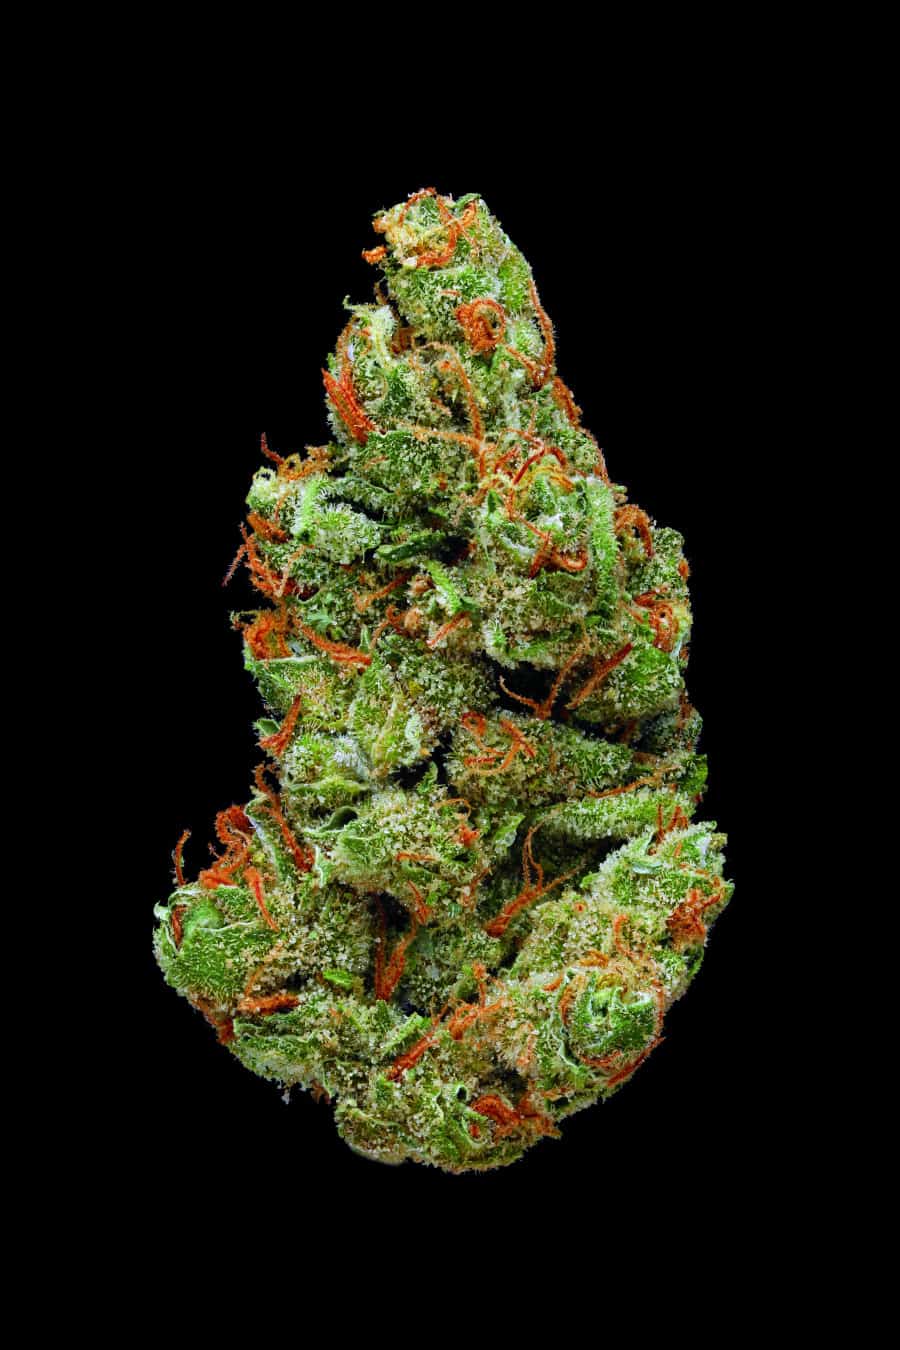 We’ll Bet You Didn’t Know Marijuana Looks This Beautiful Up Close ...
